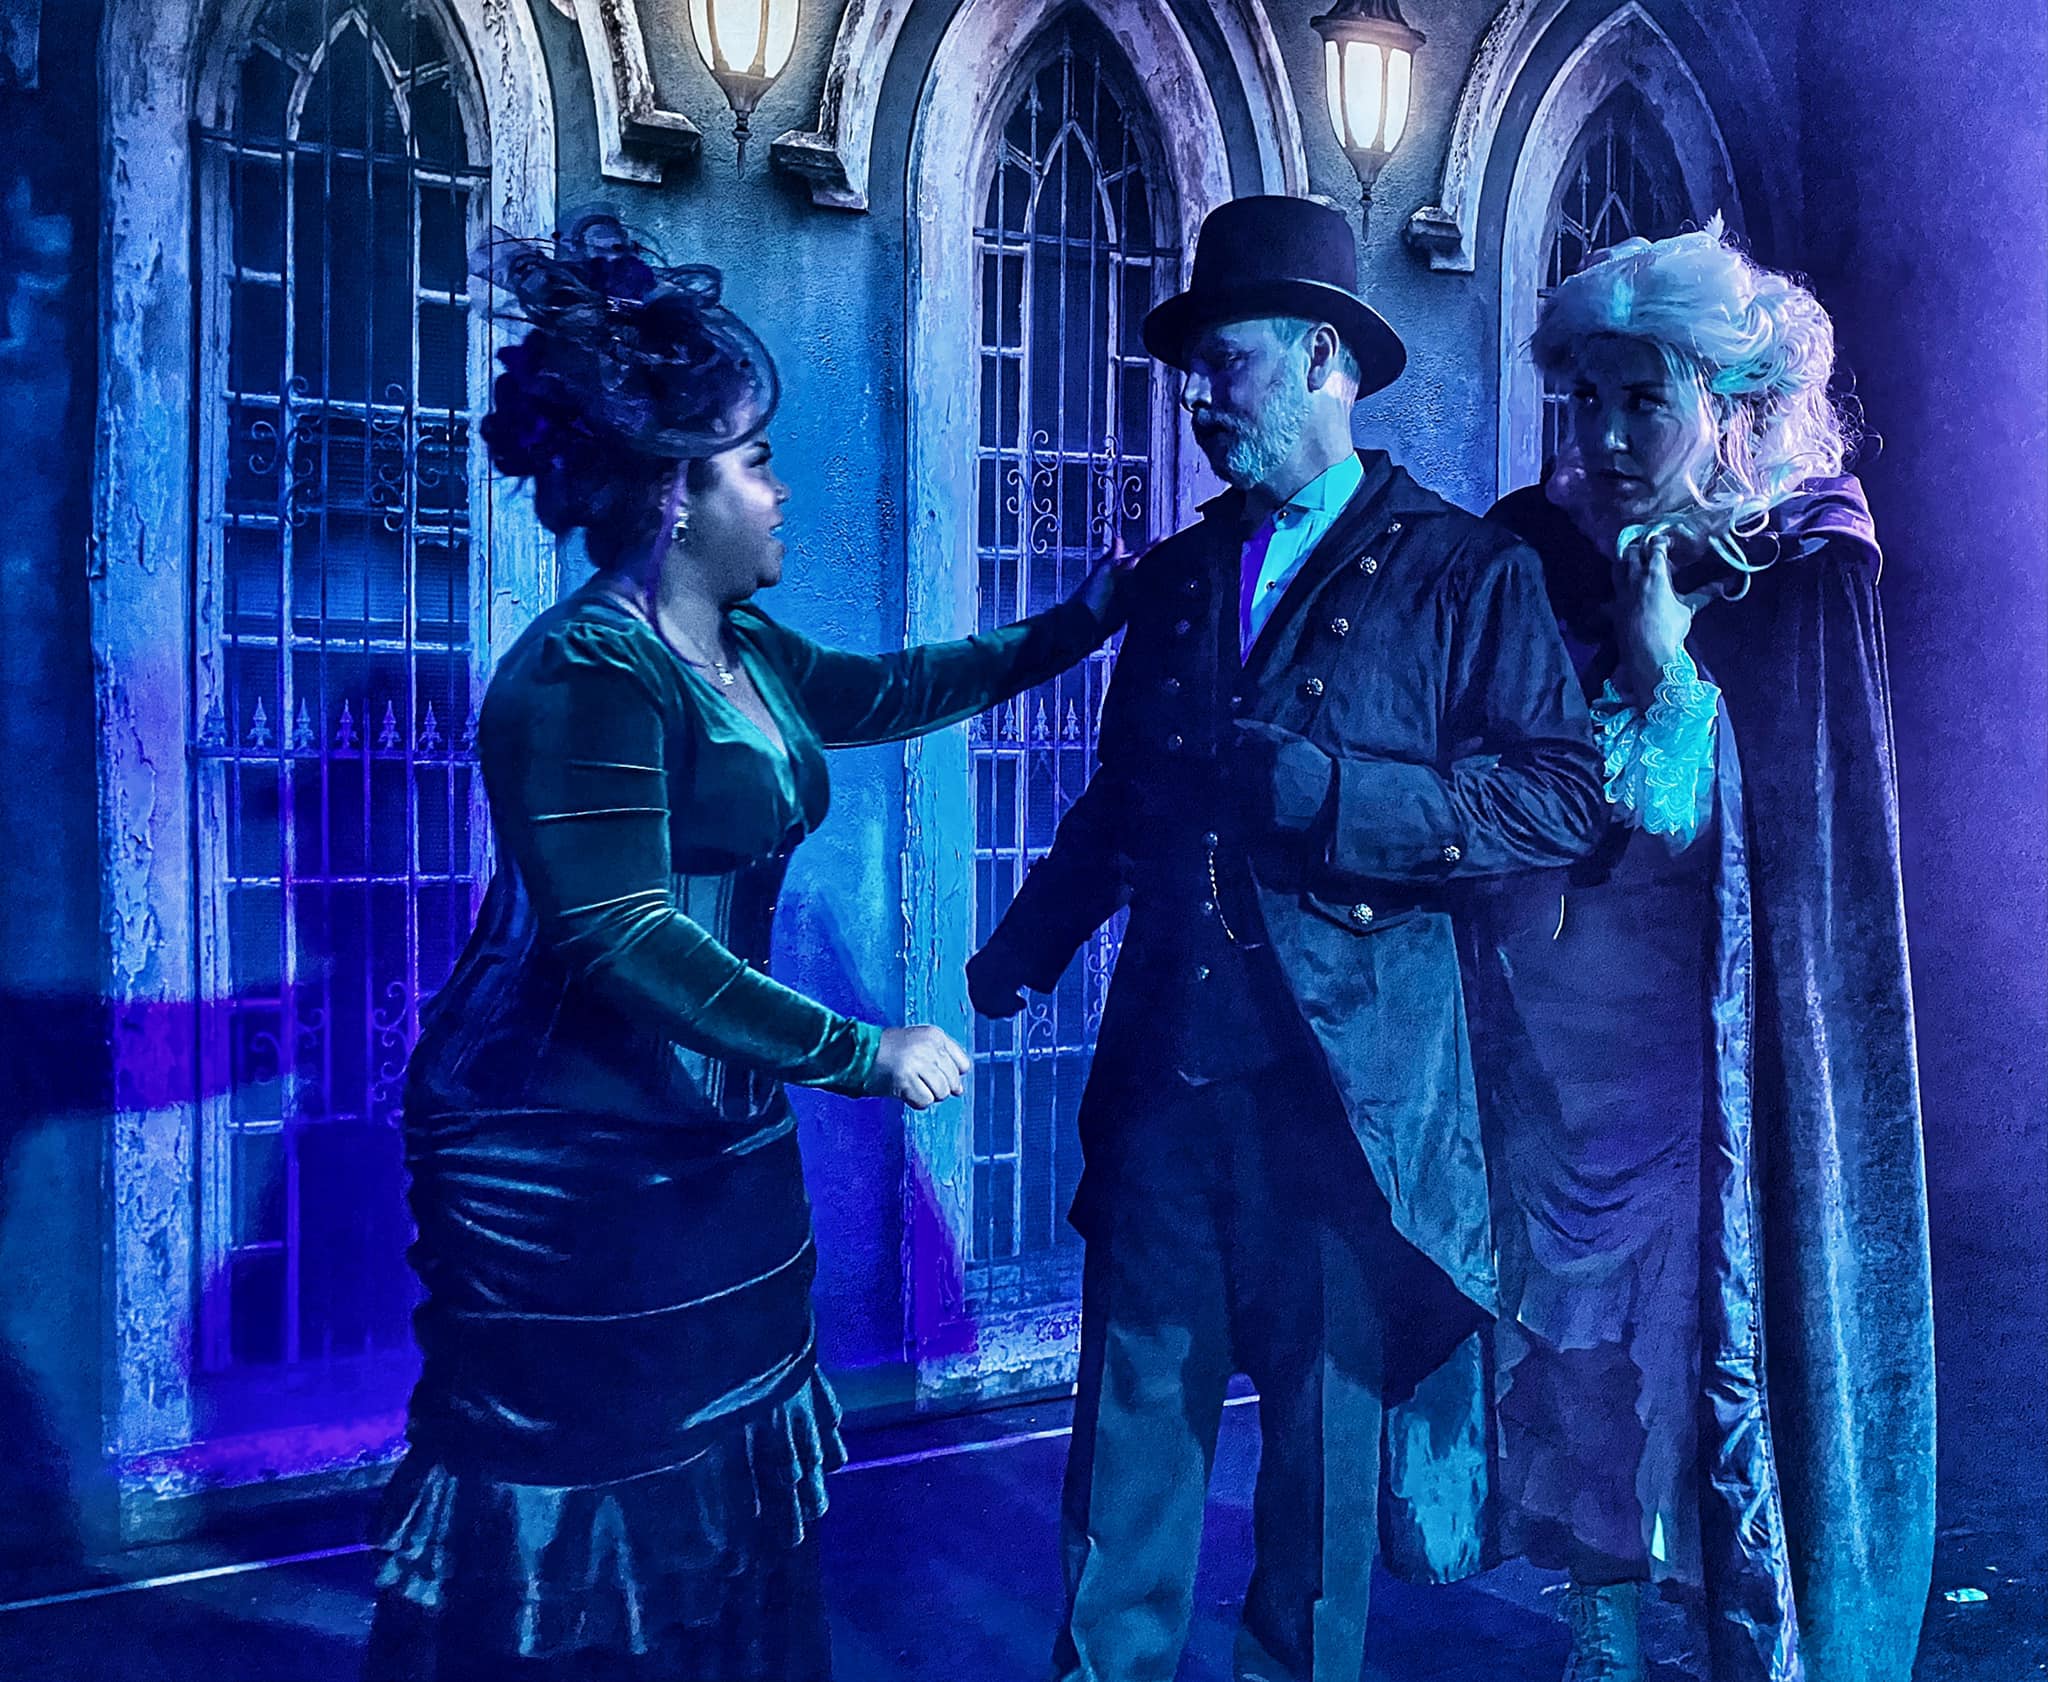 Sir Danvers Carew and his daughter Emma consult with Lady Savage on the murders threatening London's upper class.